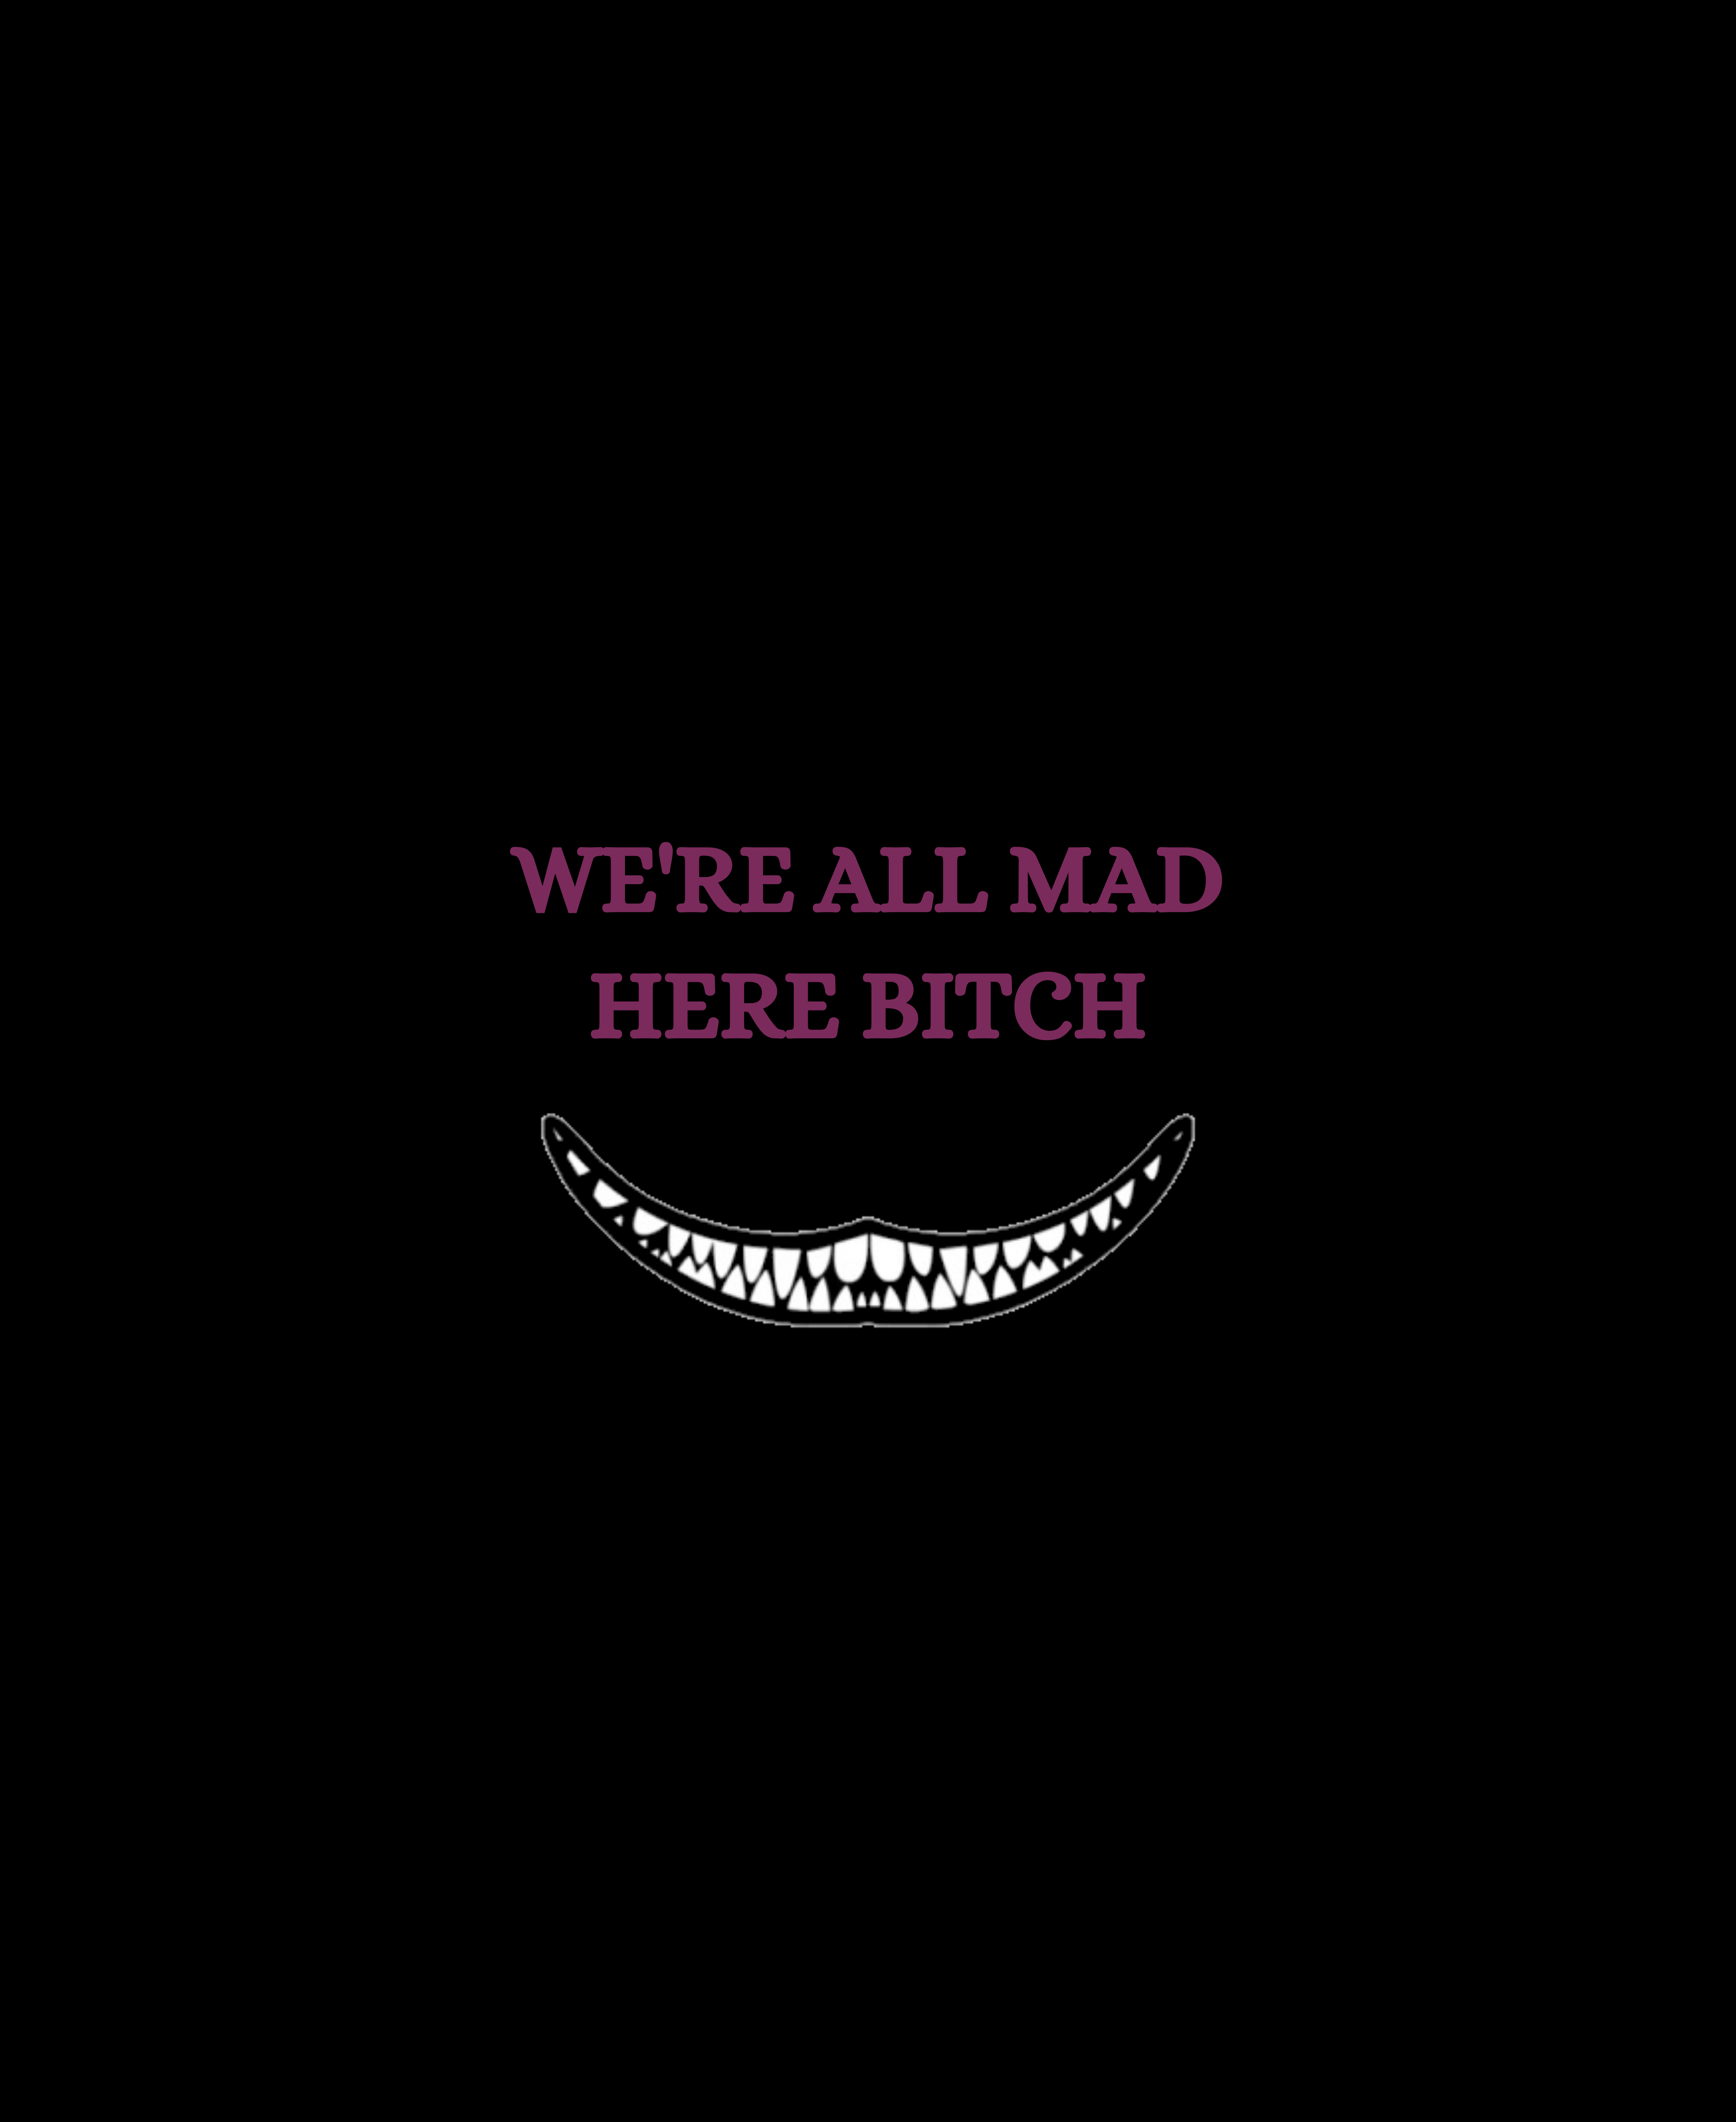 We're All Mad Here Wallpapers - Wallpaper Cave